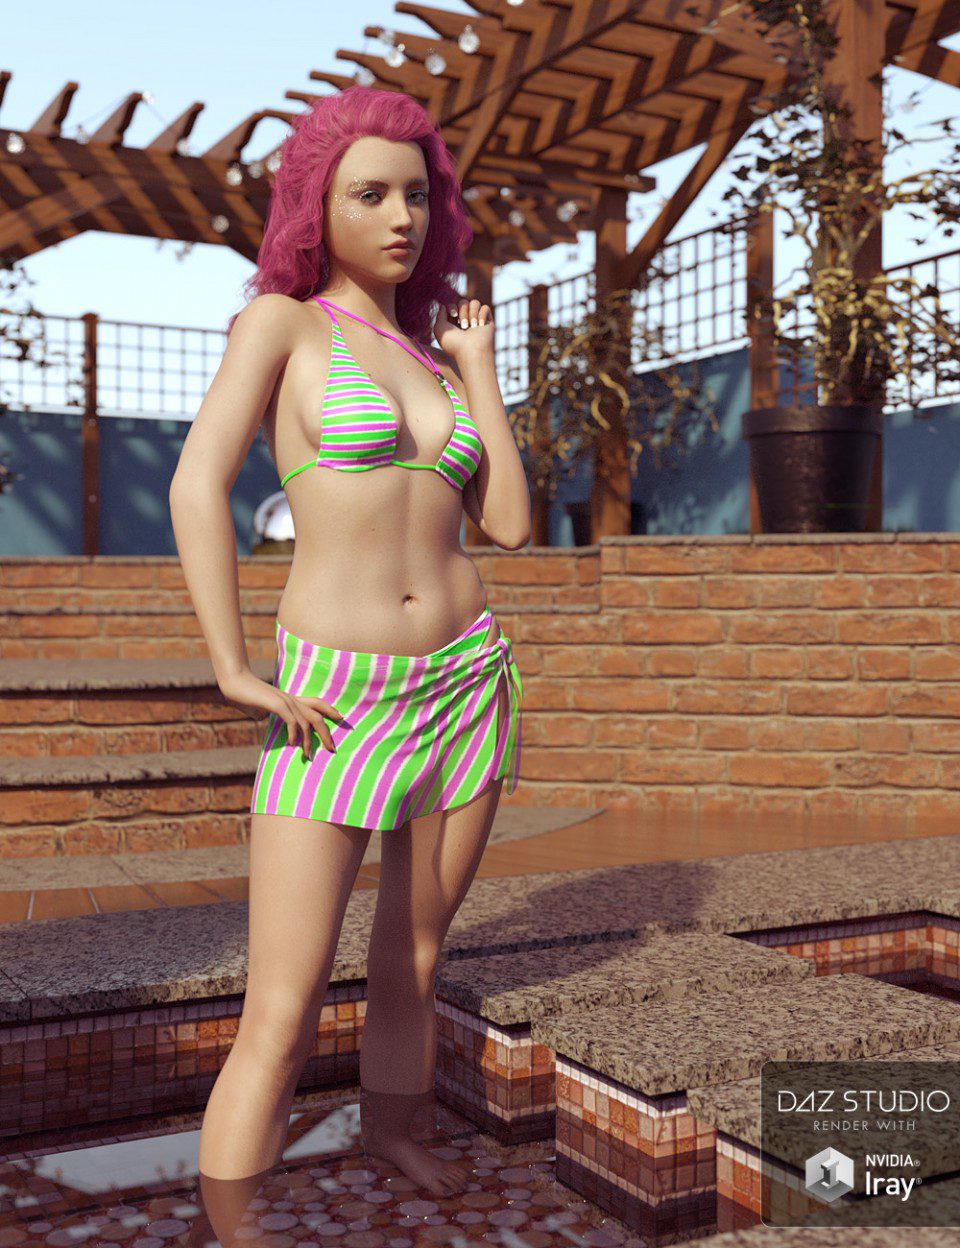 Summer Fun Textures for RealFit Ring Bikini and Wrap_DAZ3DDL